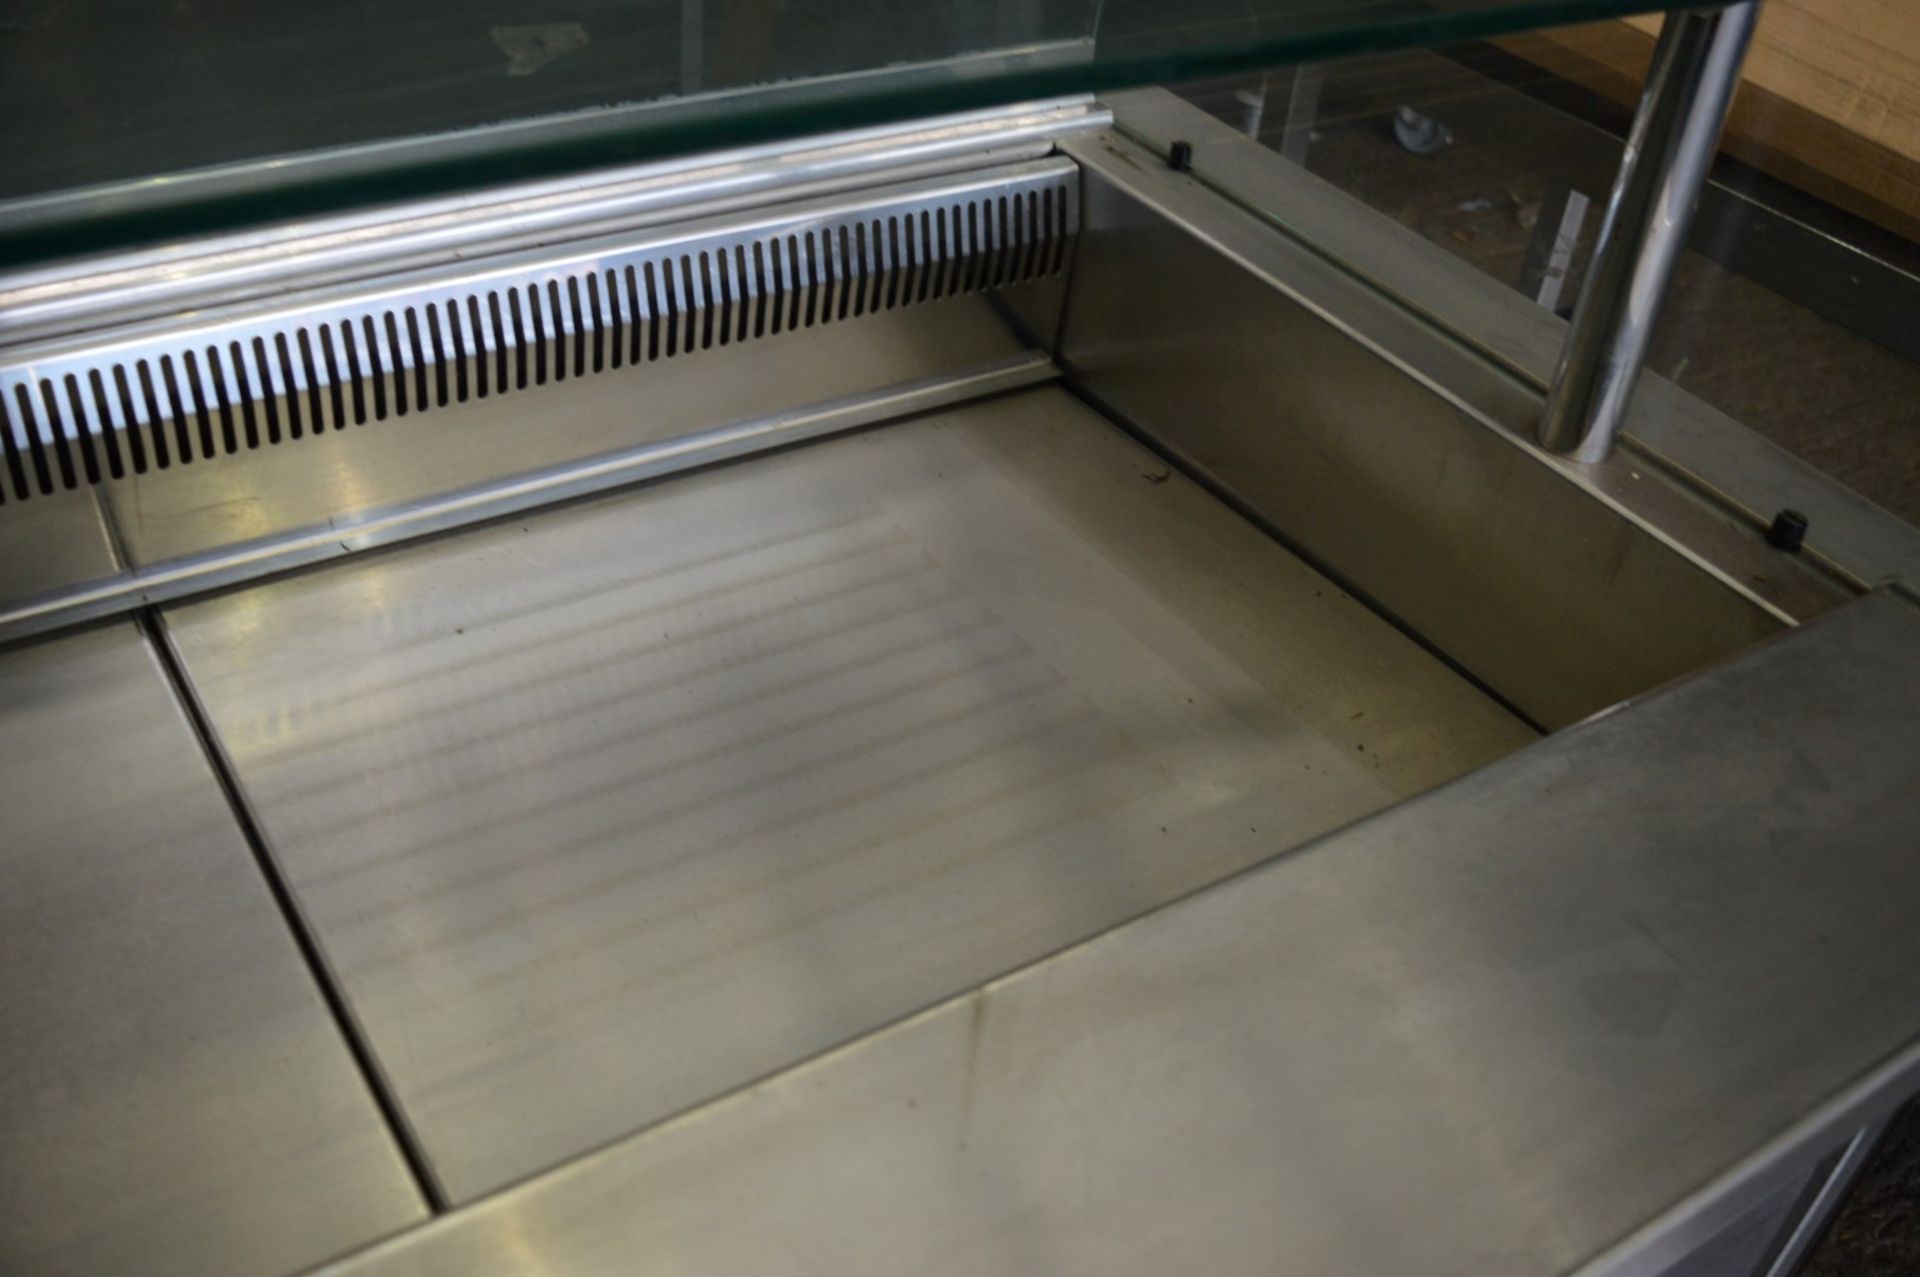 1 x Heated Deli Serving Counter - Ideal For Pub Carvery, Canteens, All You Can Eat Restaurants, - Image 5 of 9